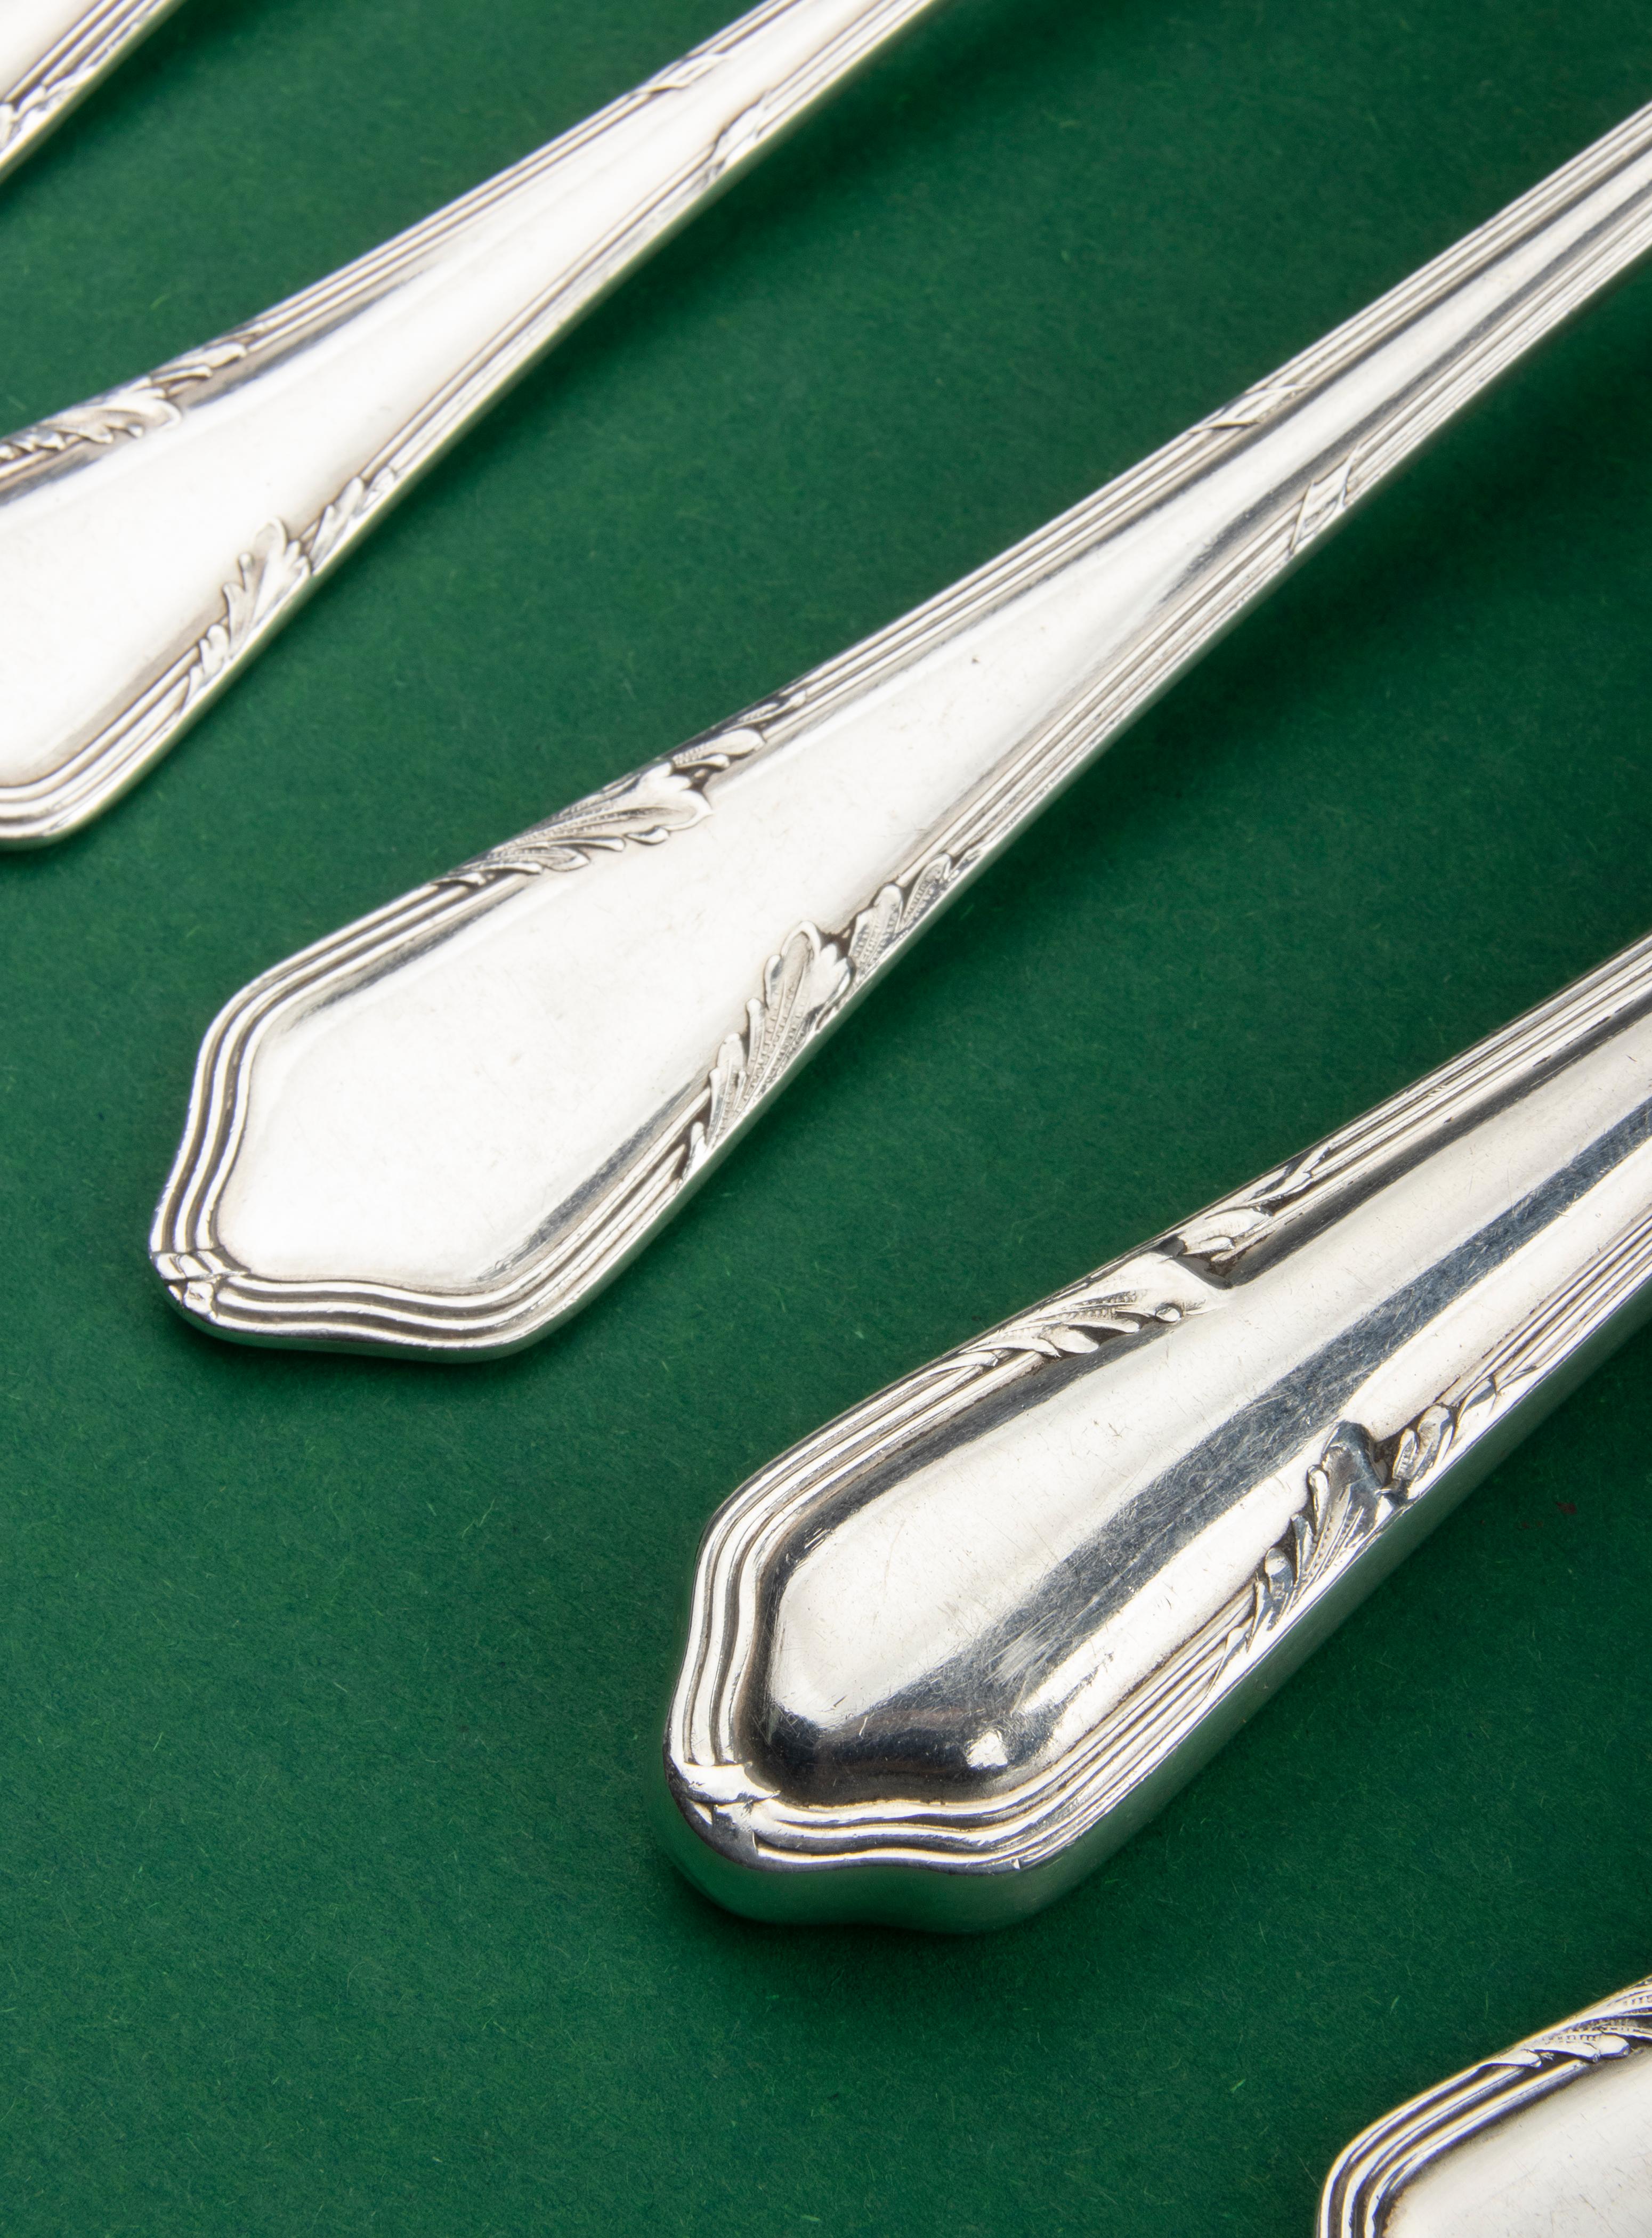 136-Piece Set of Silver Plated Flatware in Canteen made by Wellner For Sale 4